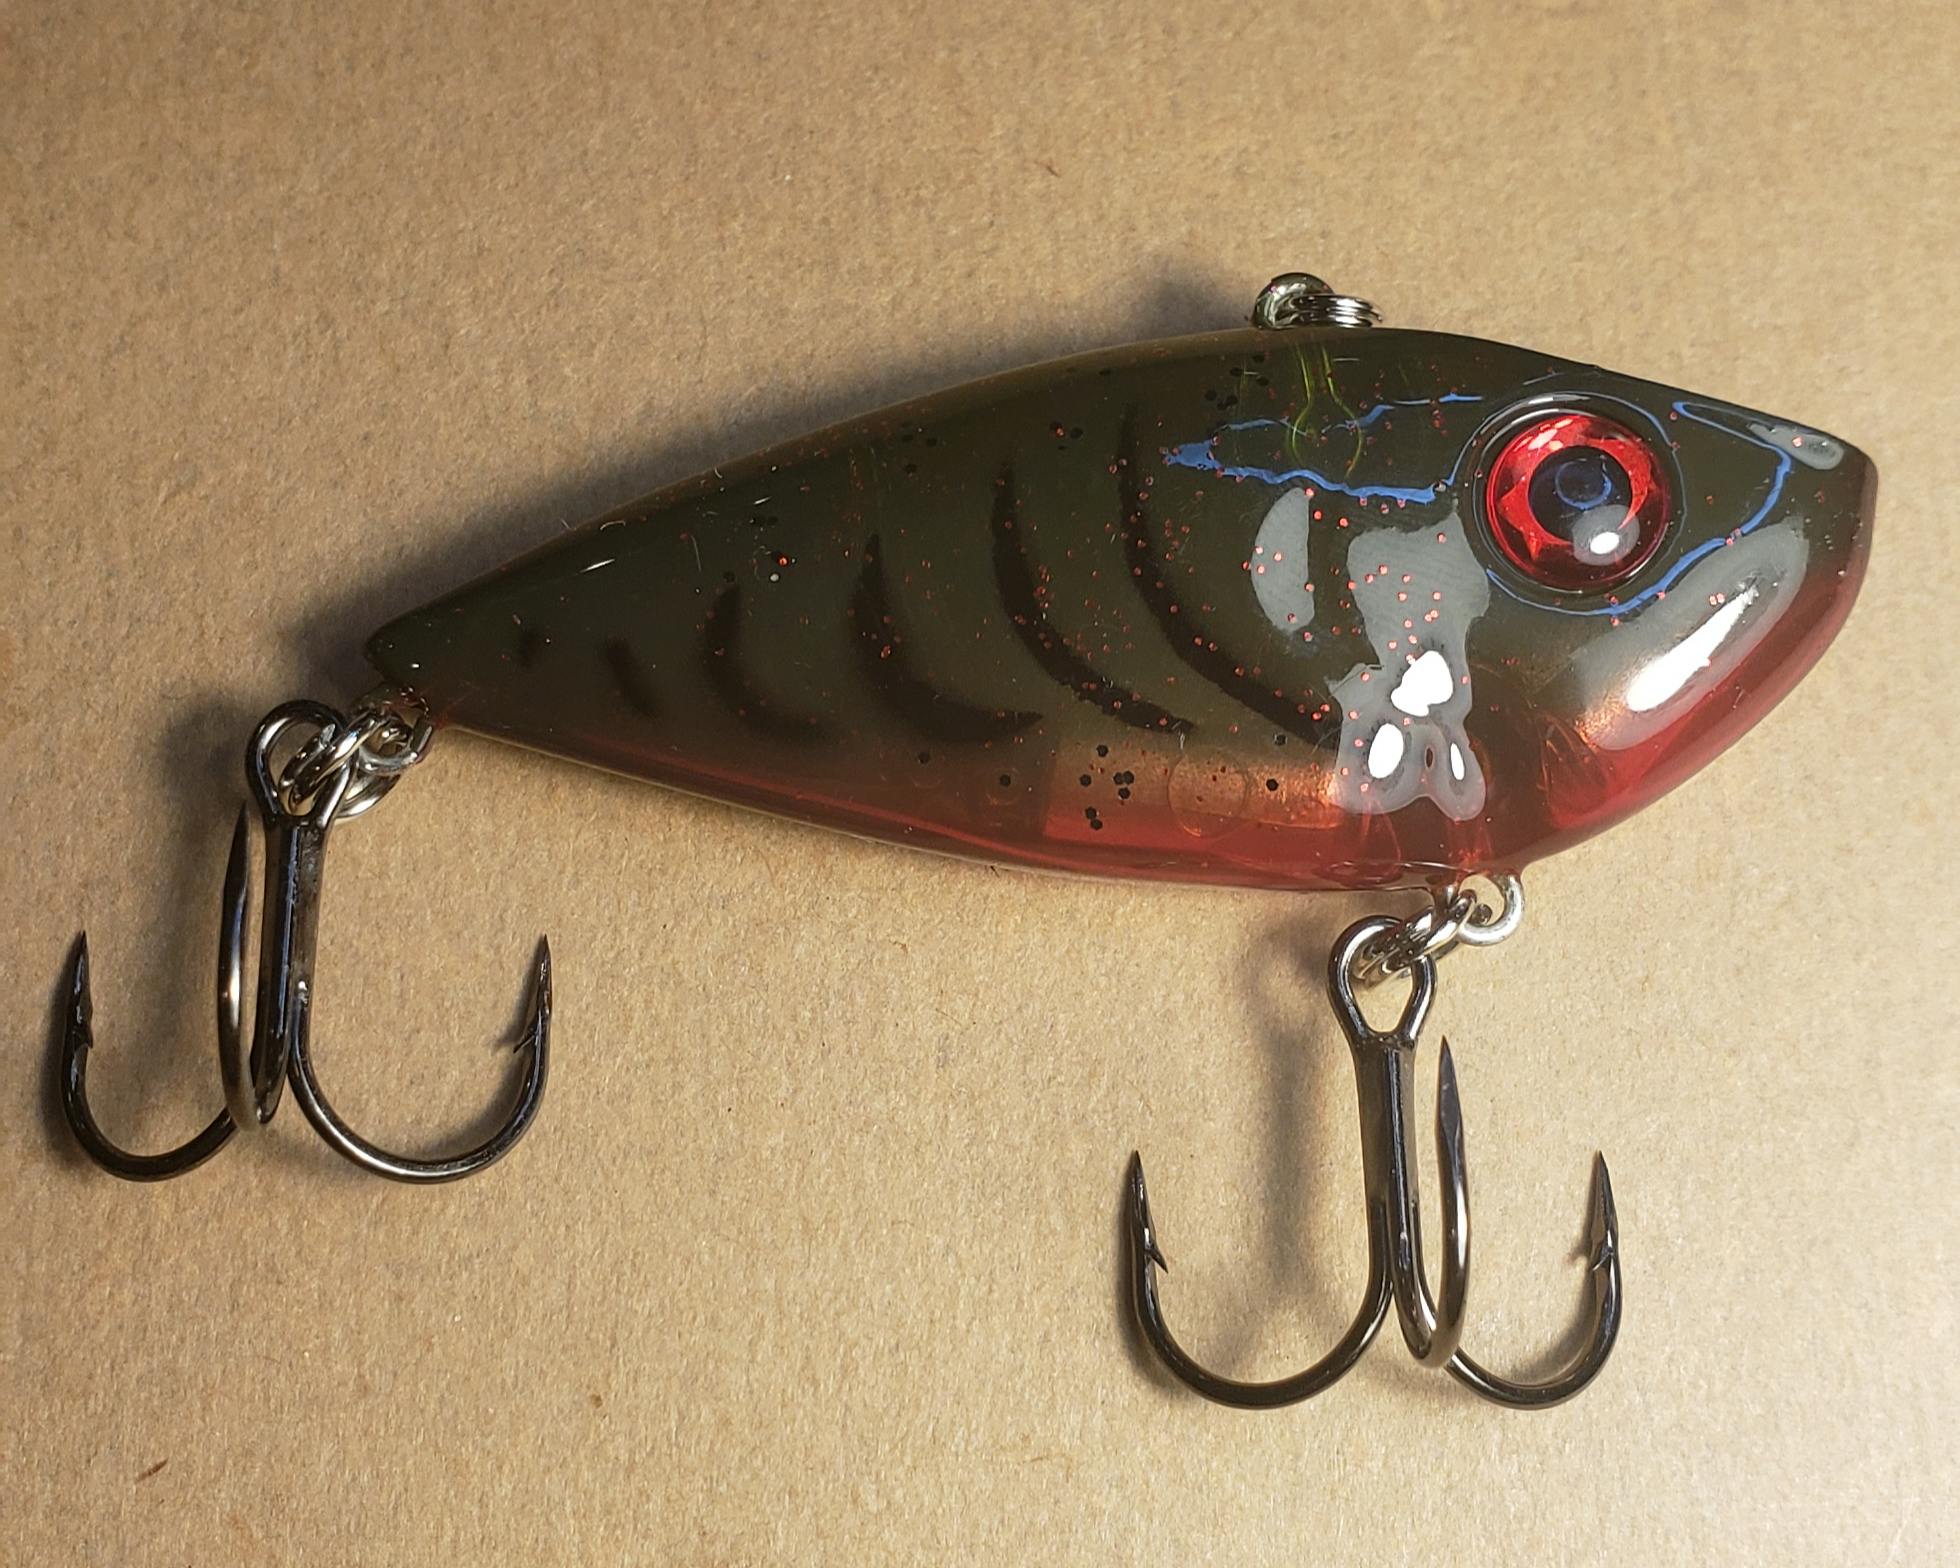 Strike King Red Eye Shad in the Chili Craw Pattern on a plain tan background.